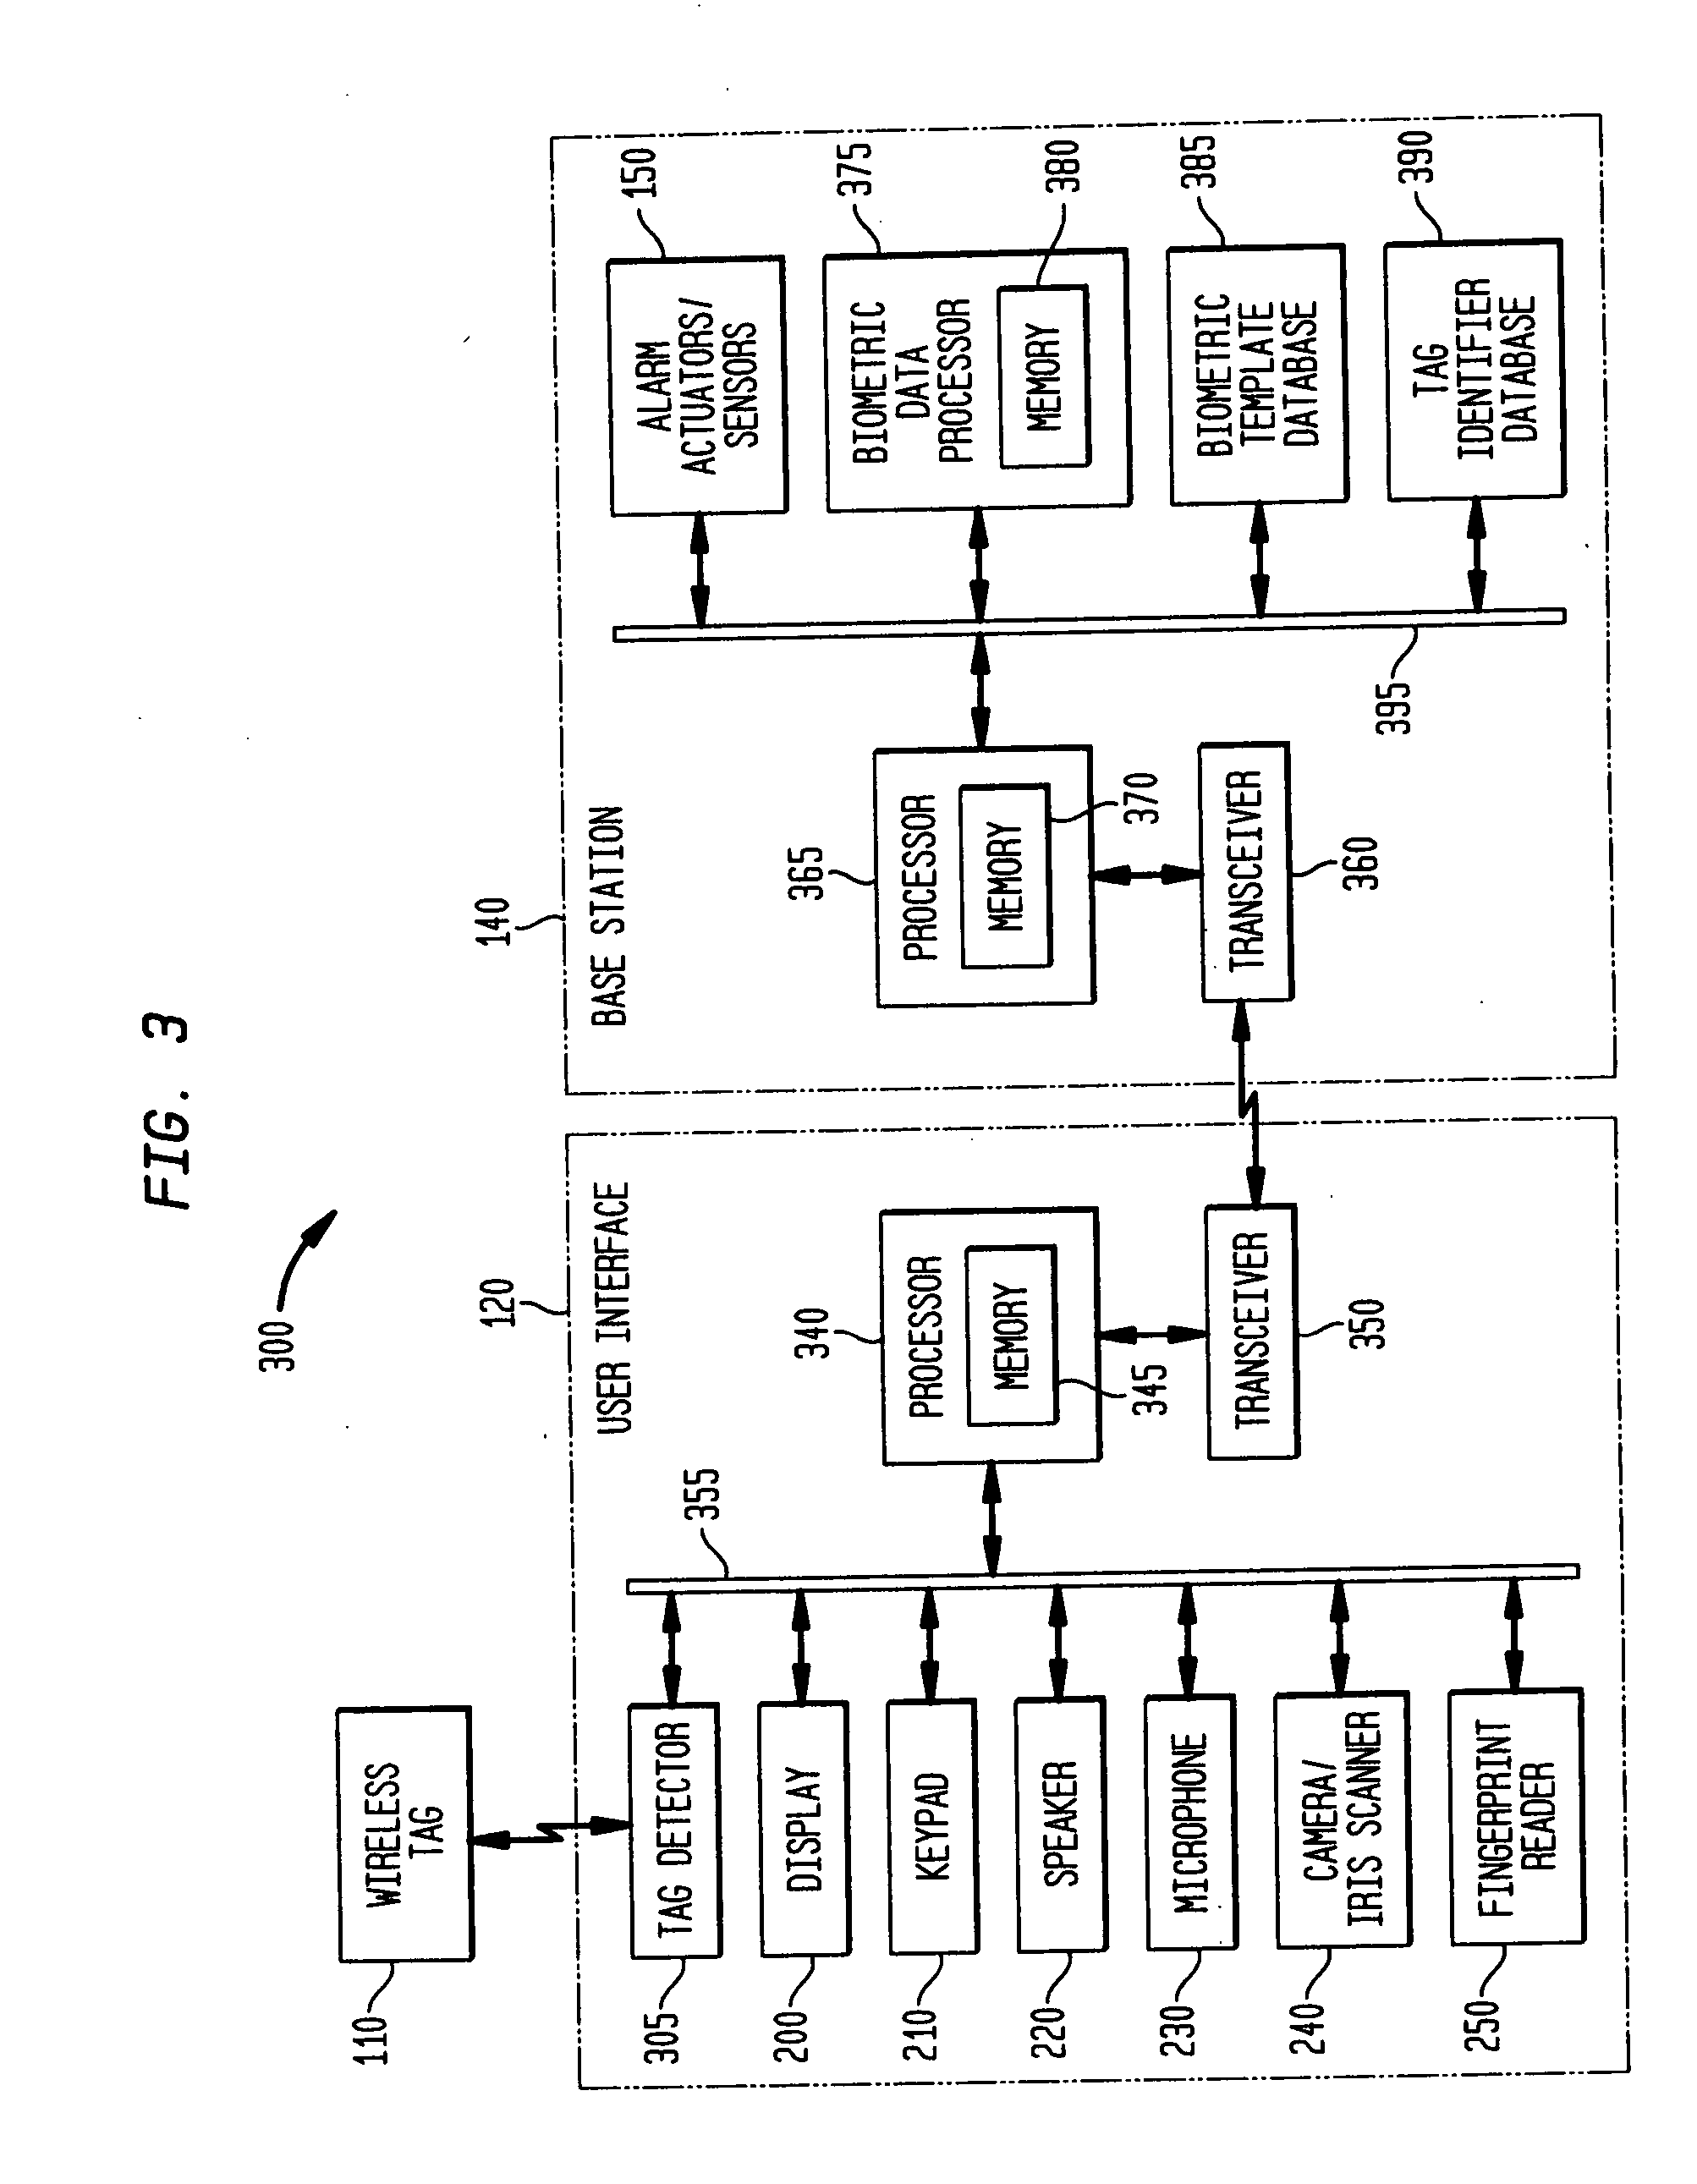 Biometric verification and duress detection system and method